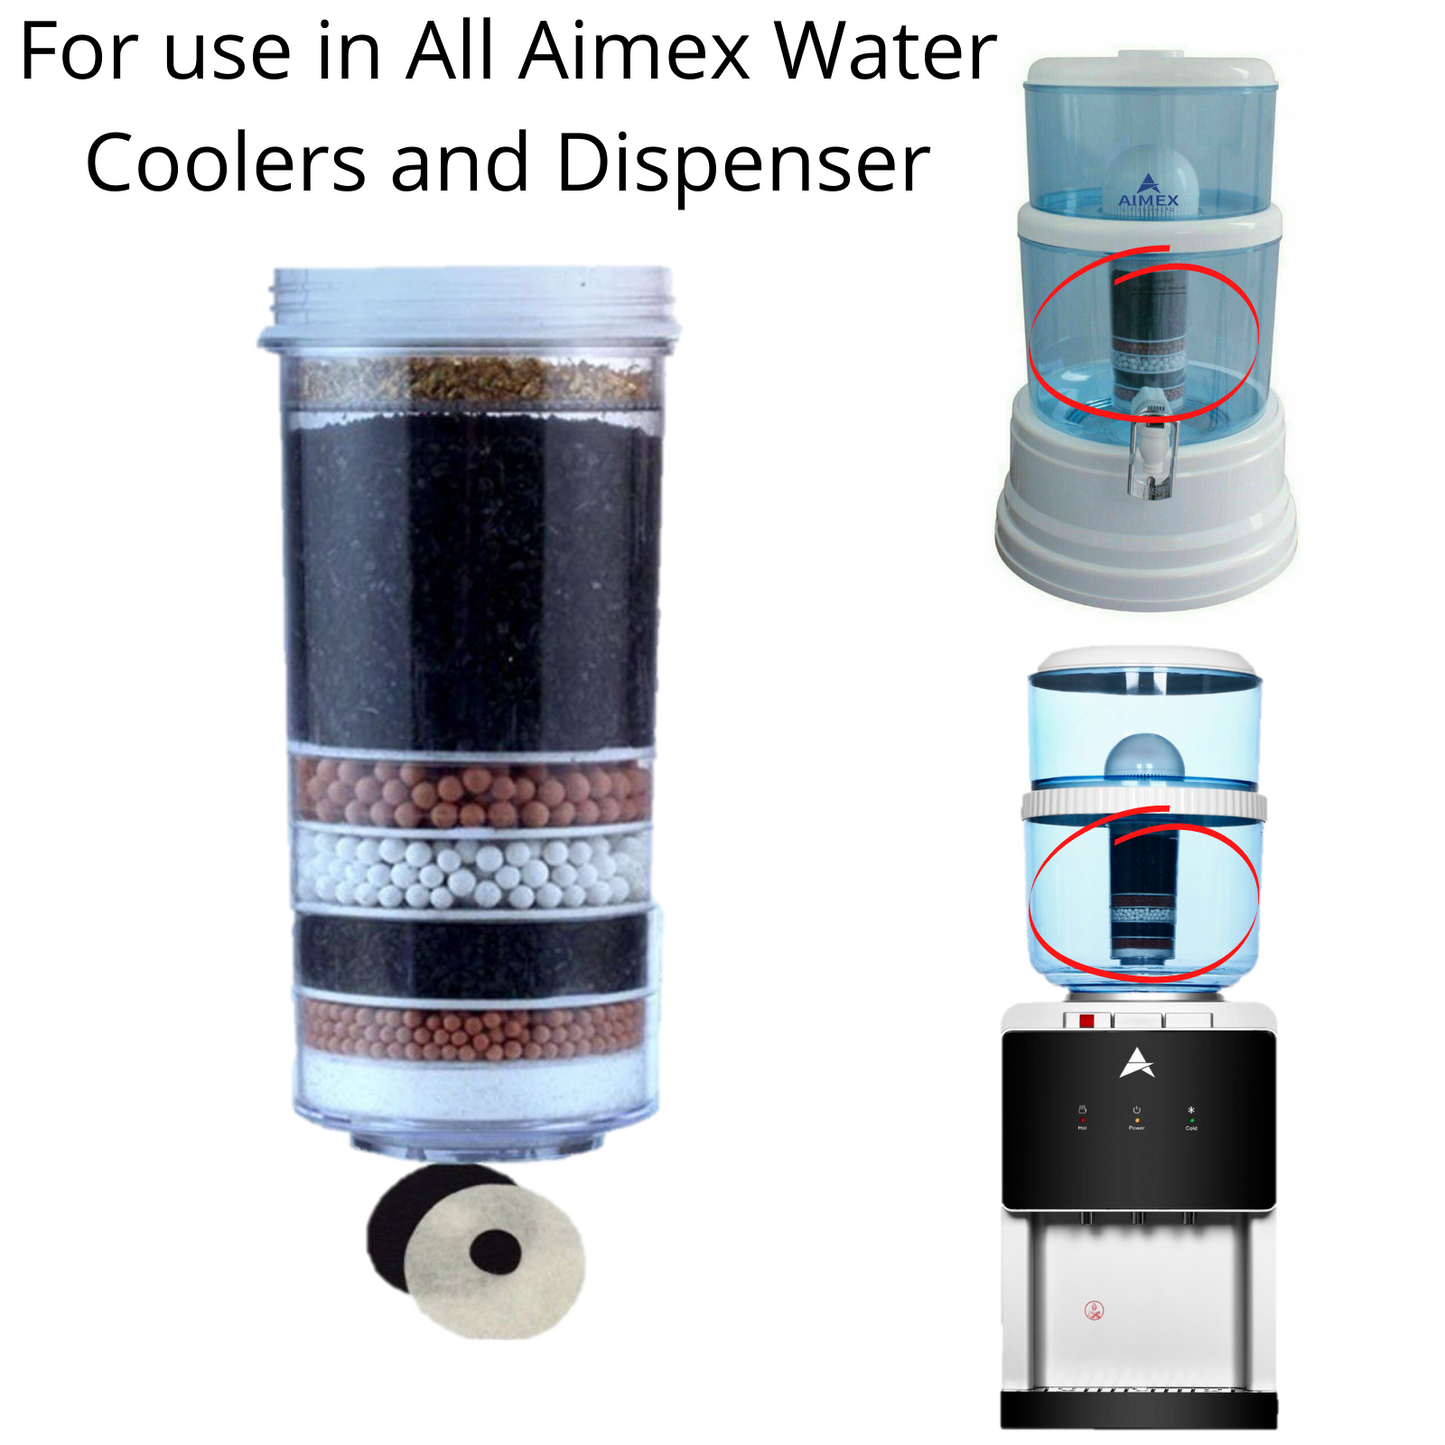 Mari Aimex 8 Stage Water Filter Replacement Cartridge - 4 Pack